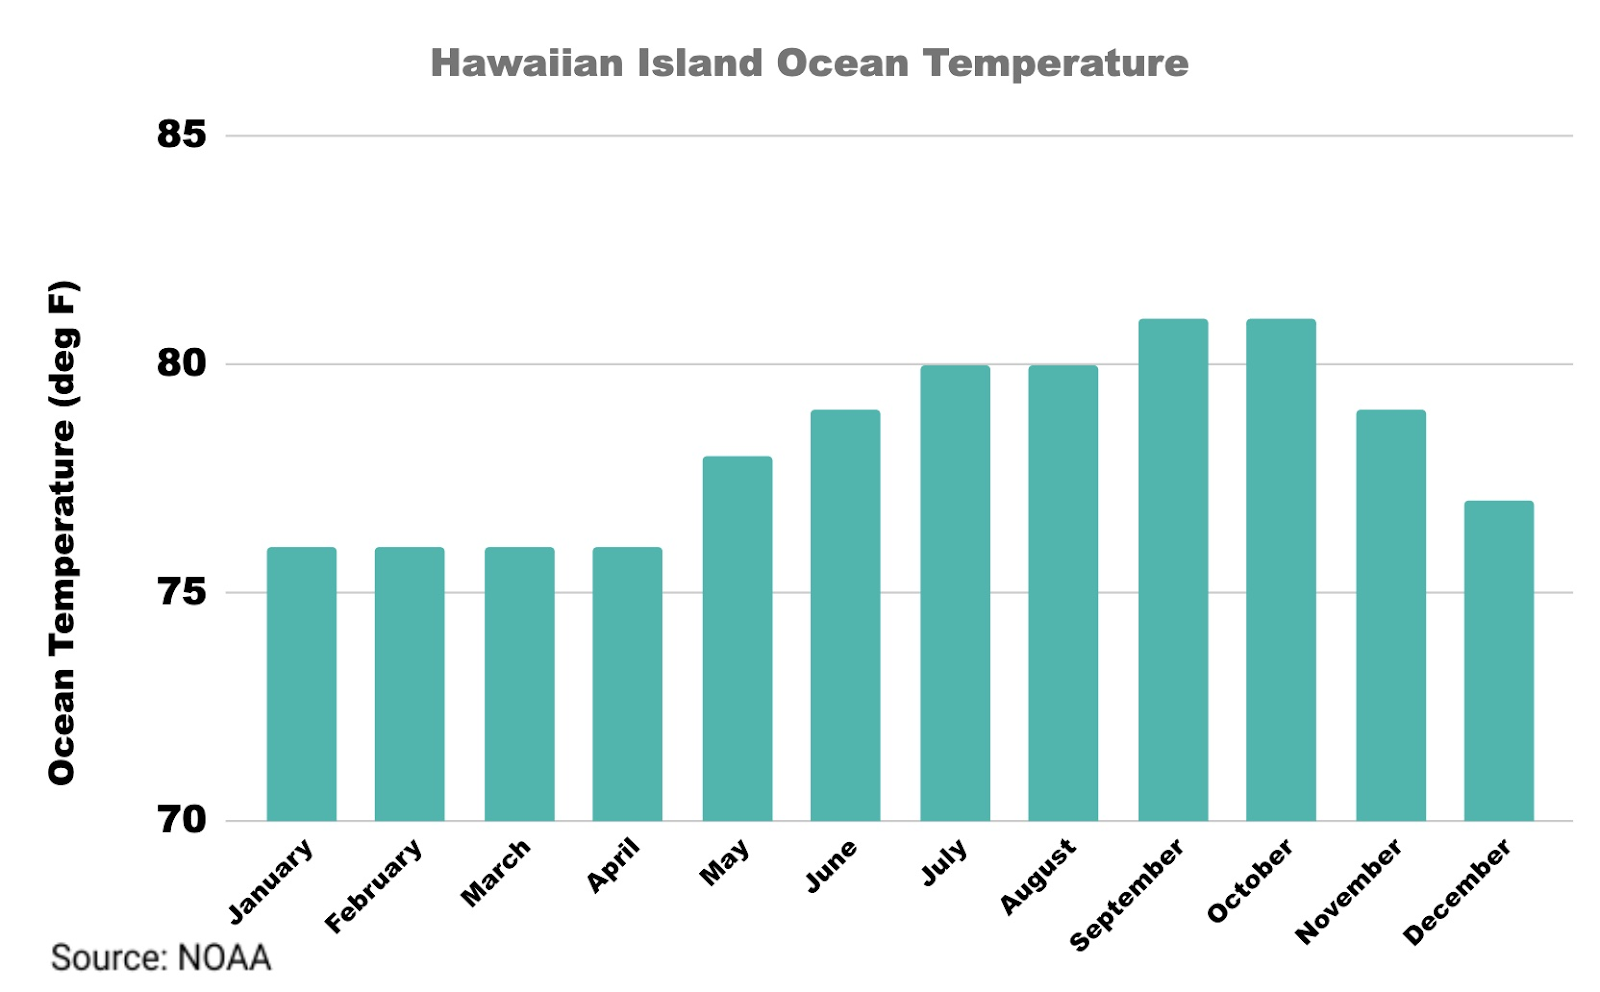 A graph by NOAA showing the ocean temperatures (Fahrenheit) around the Hawaiian islands throughout the year. January through April stays around a steady 76 degrees with the warmest temps in September and October reaching about 81 degrees.